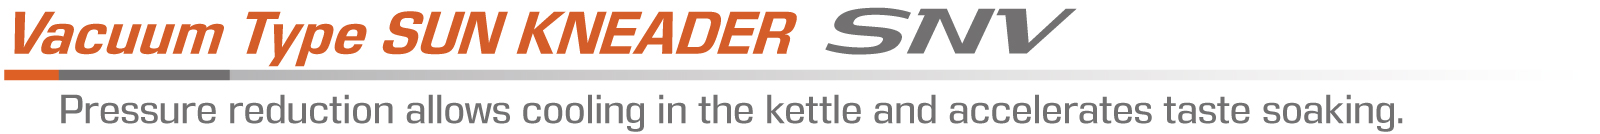 Vacuum Type SUN KNEADER Model SNV - Pressure reduction allows cooling in the kettle and accelerates taste soaking.